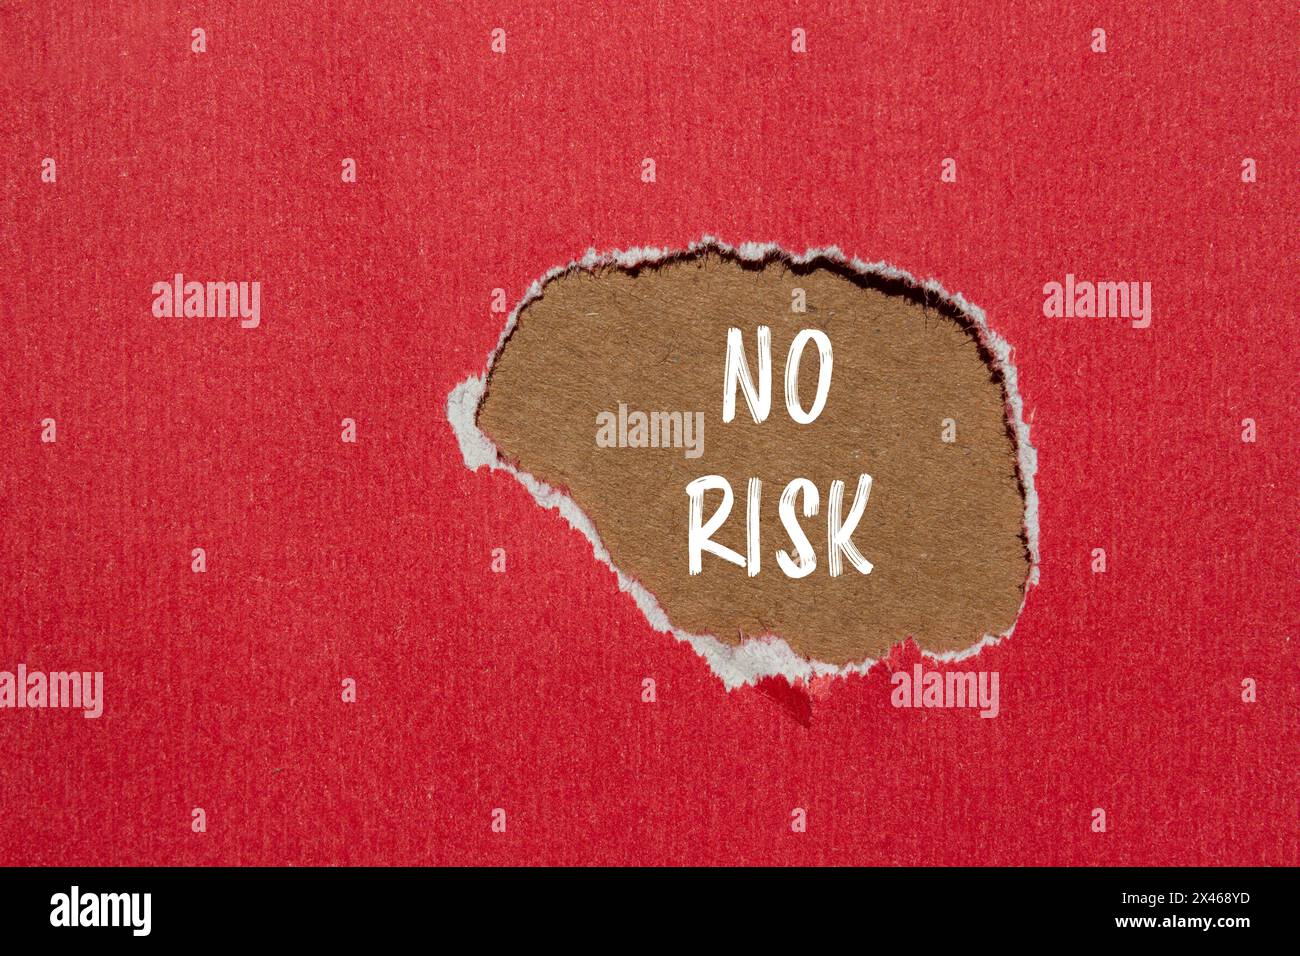 No risk written on ripped red paper with brown background. Conceptual no risk symbol. Copy space. Stock Photo